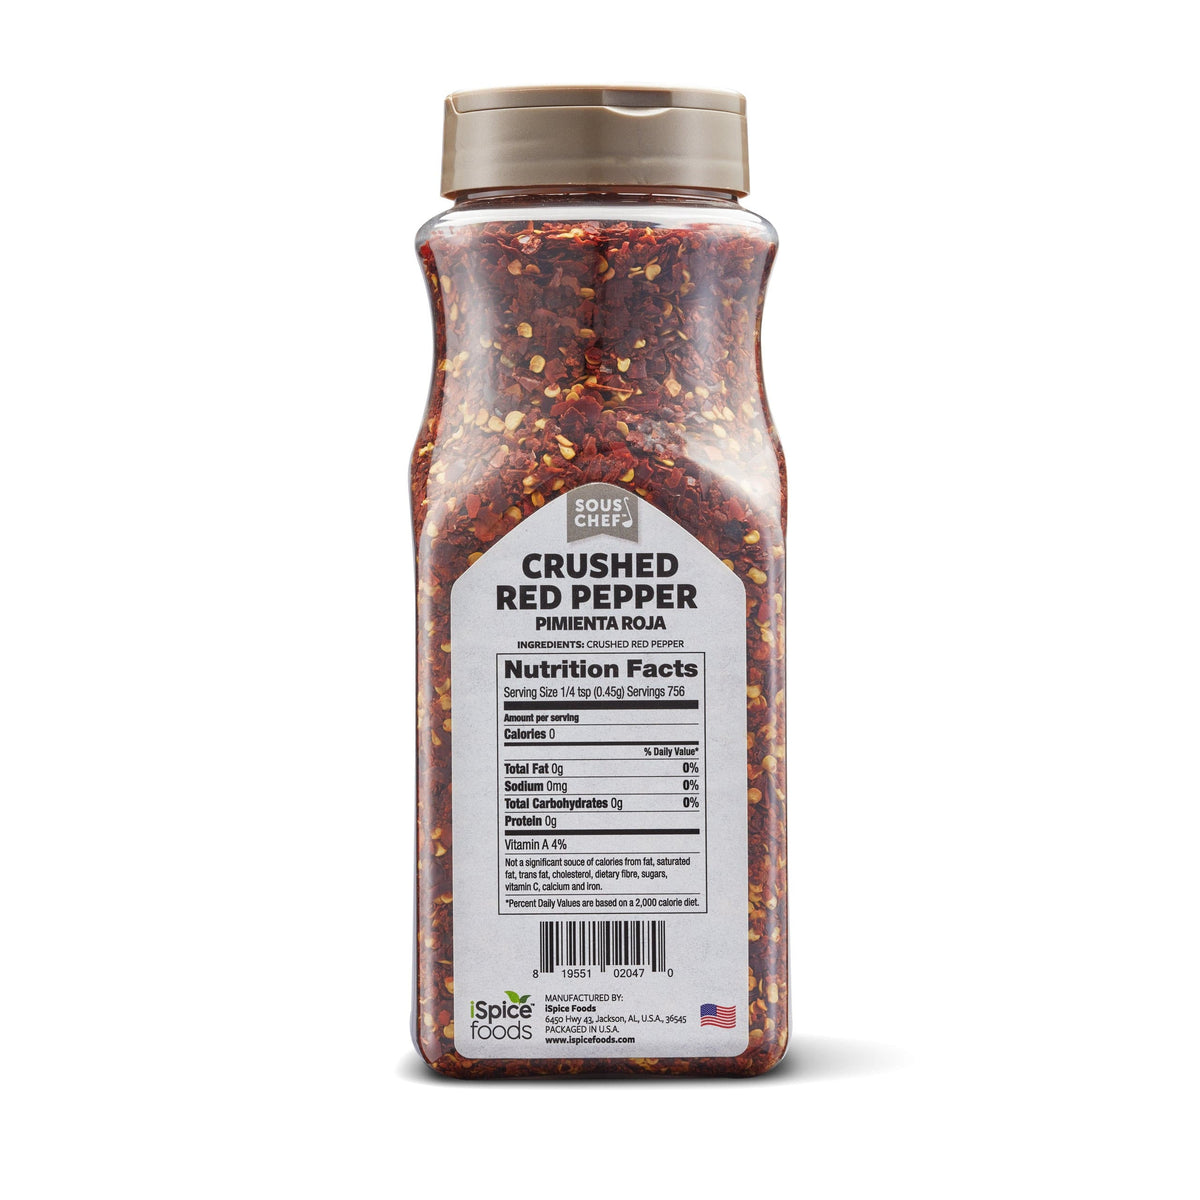 Looking to add a bit of spice to your cooking? Check out our selection of crushed red pepper flakes! Season any dish with these flavorful and spicy ingredients today.